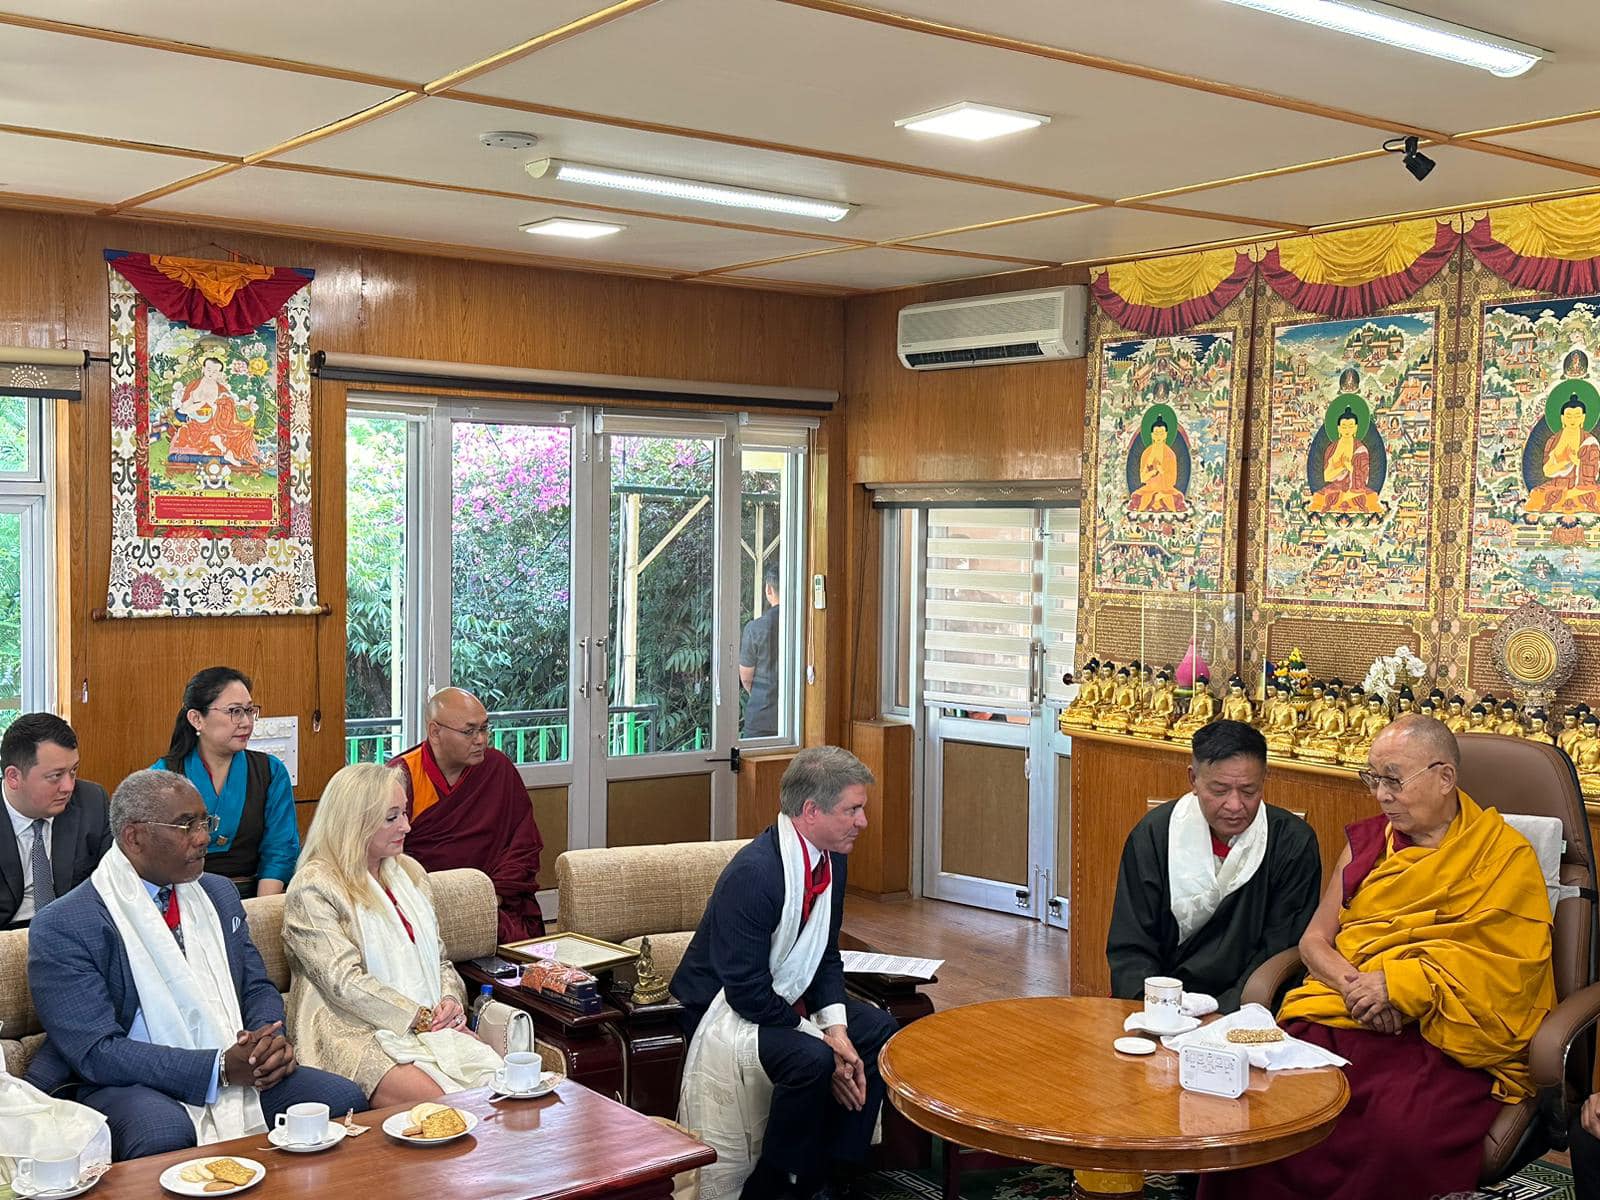 HHDL audience with US Delegation